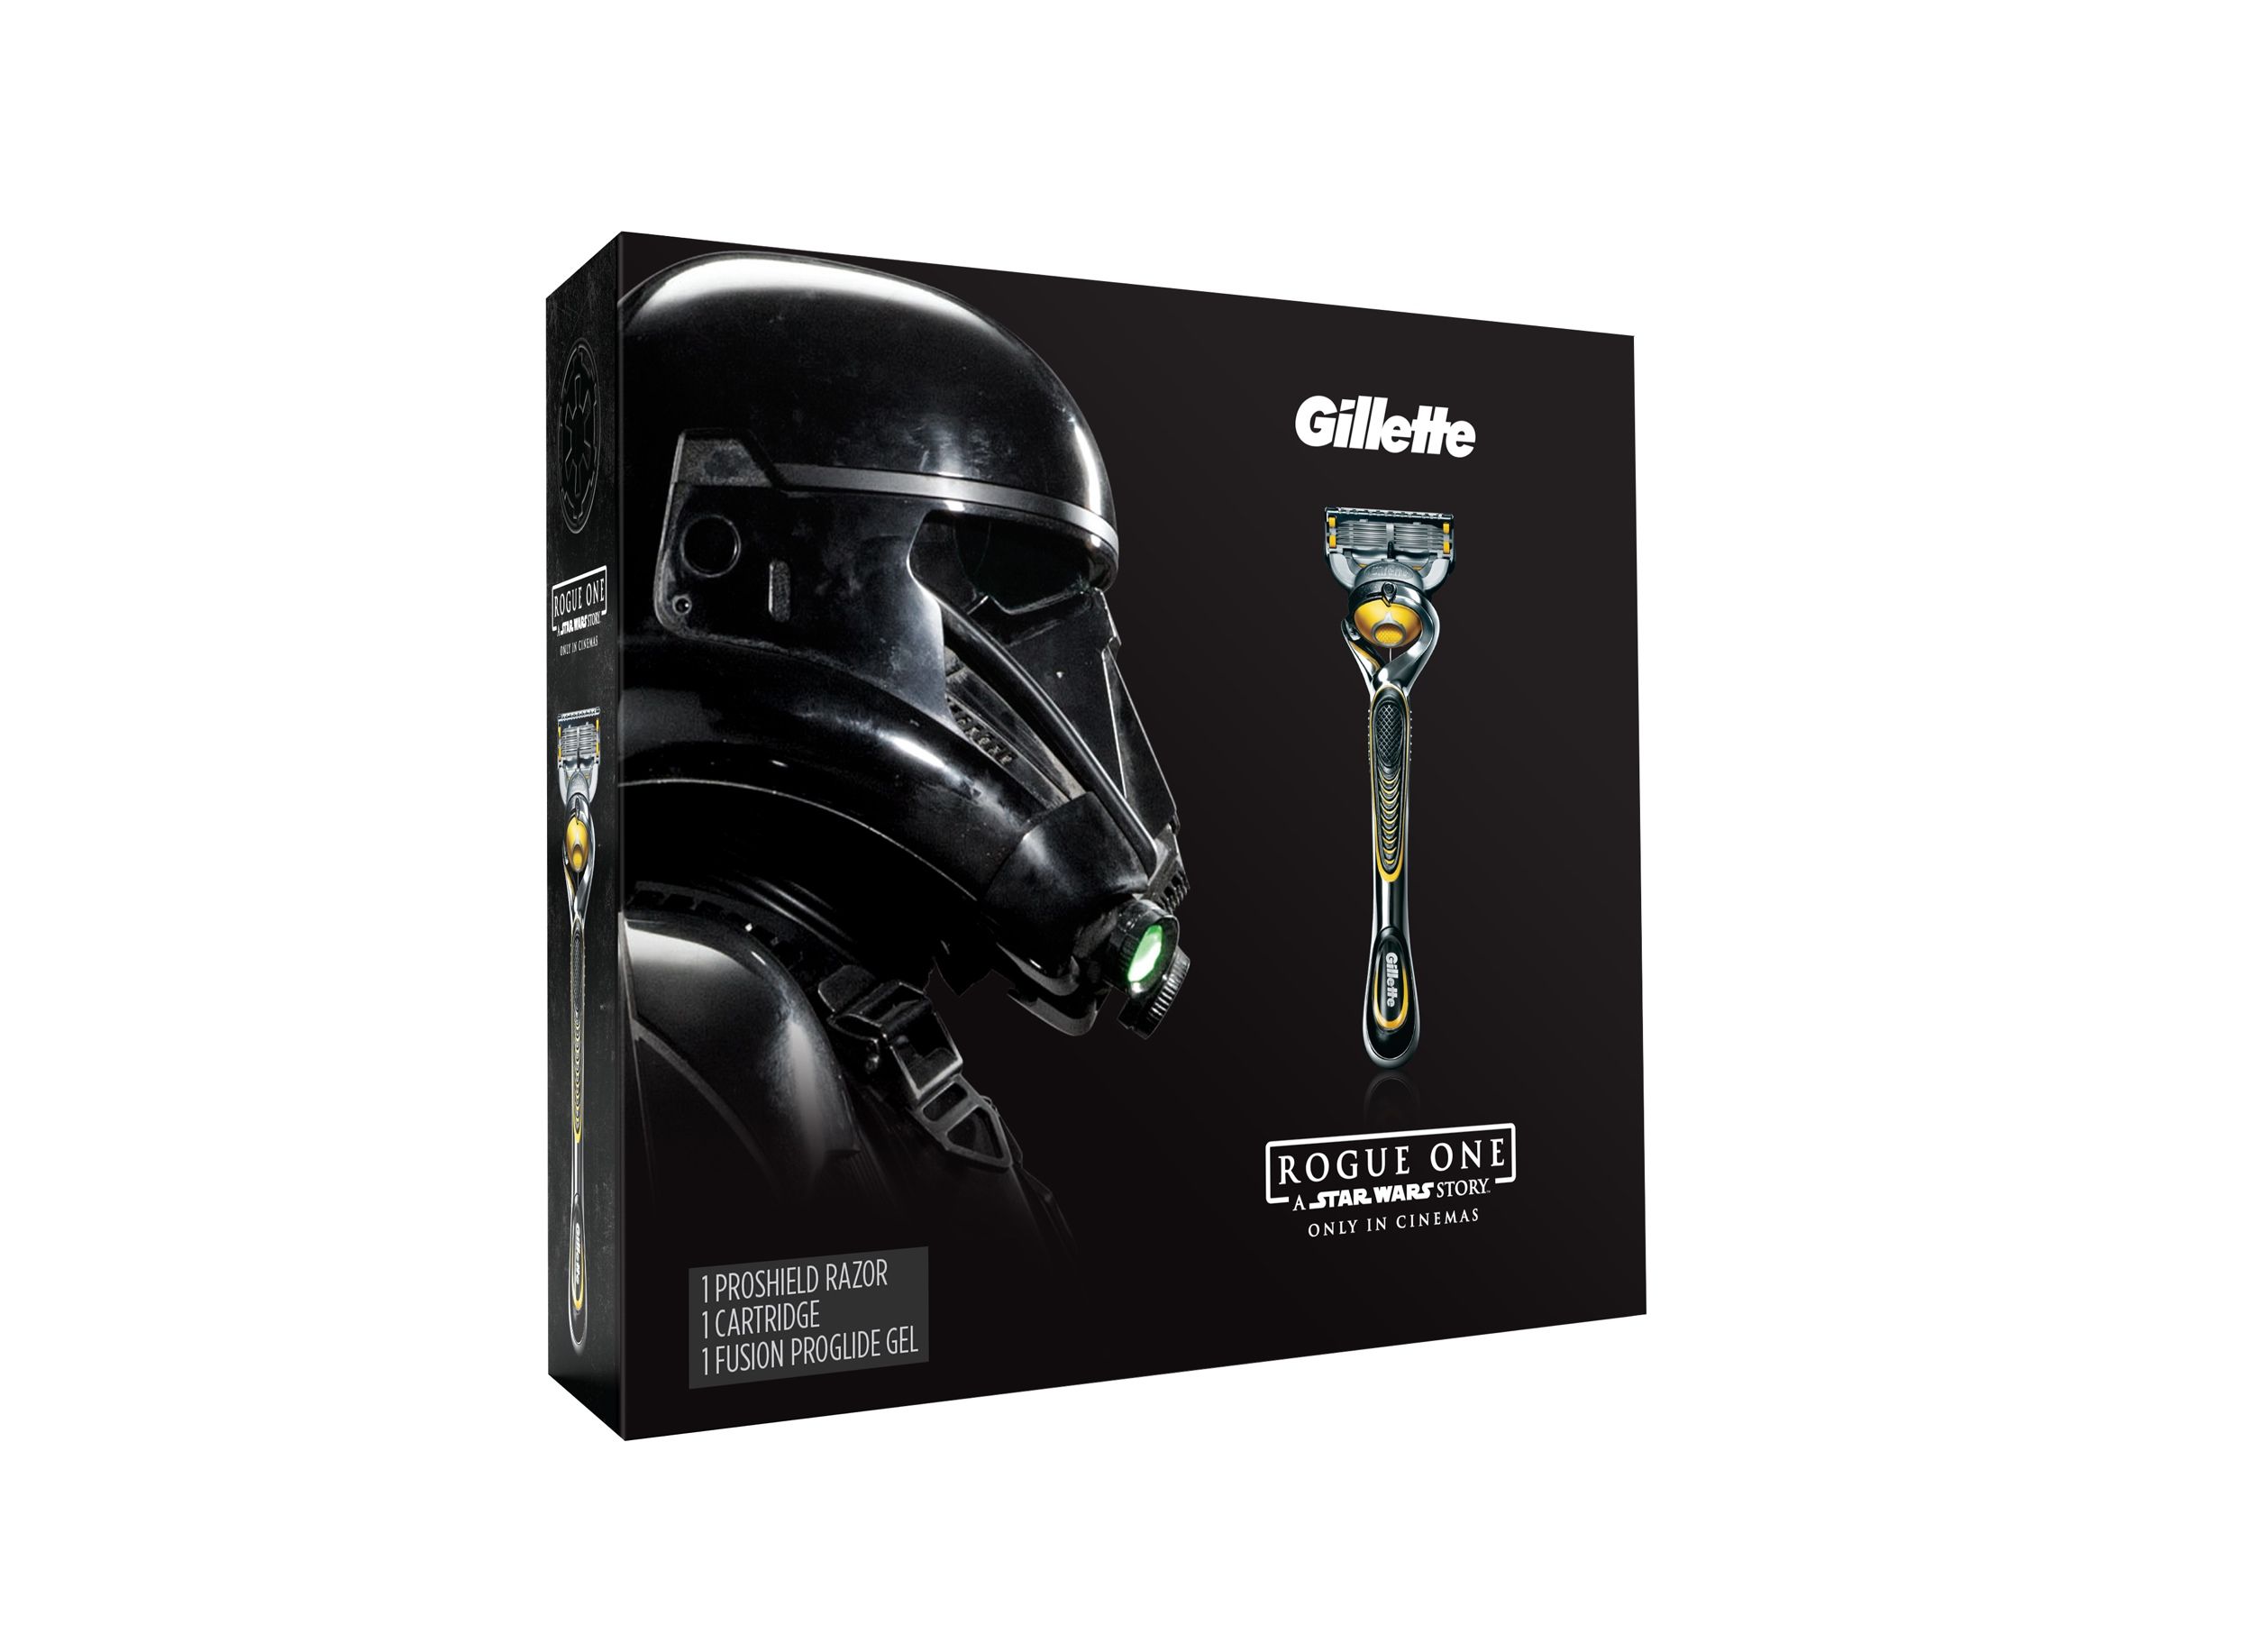 Rogue One and Gillette Special Edition ProShield Gift Pack (Death Trooper)